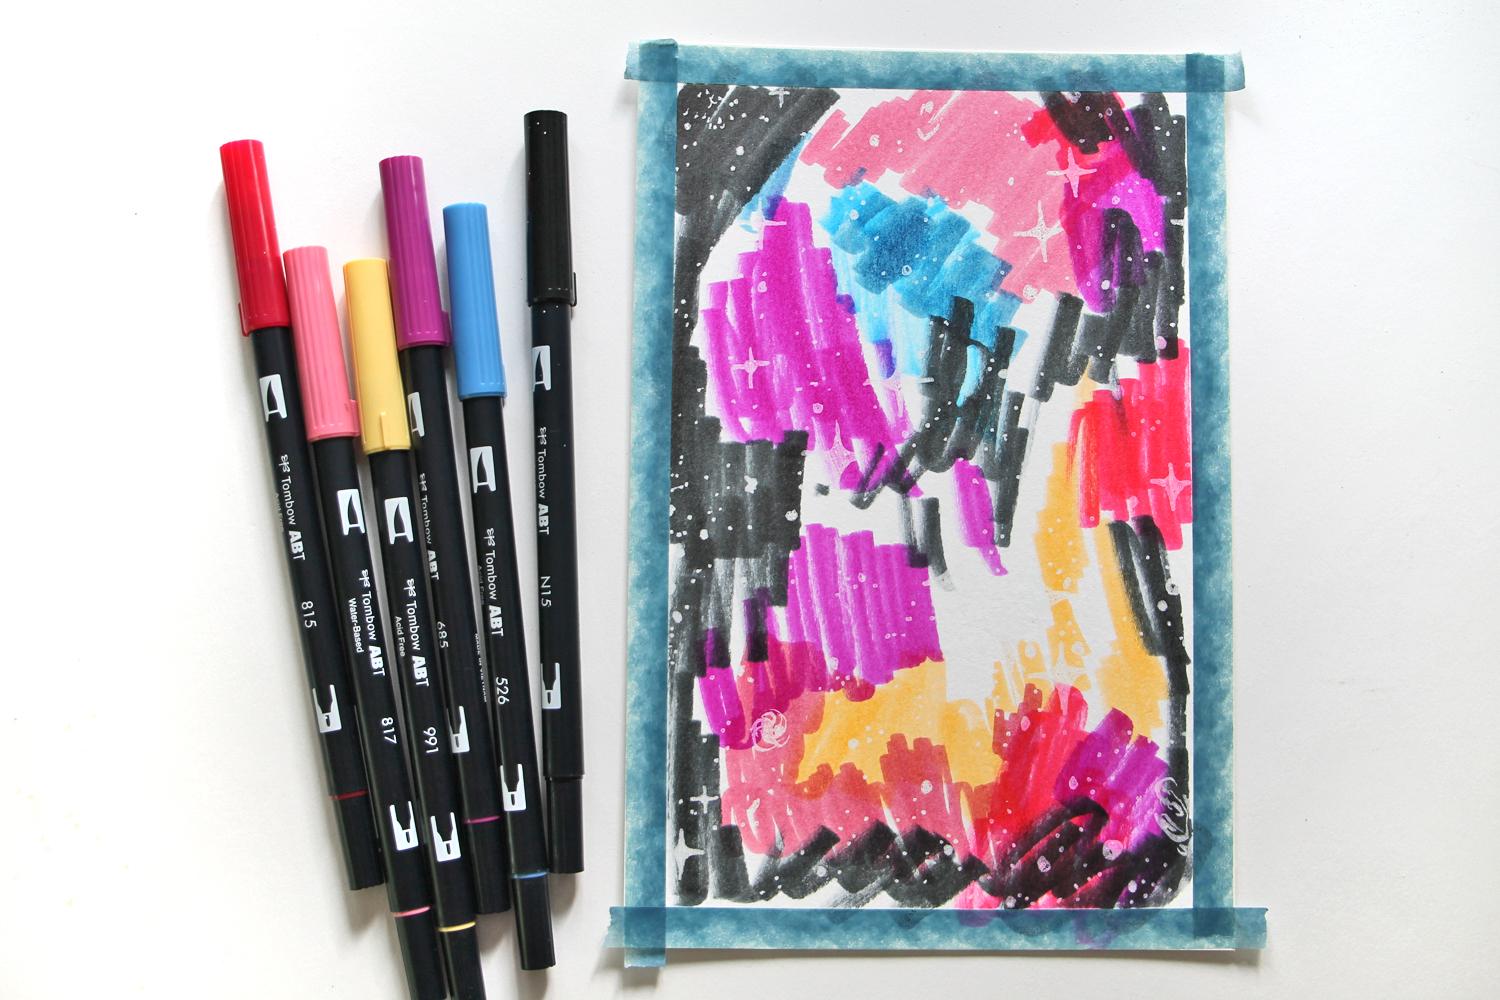 Your Guide to Painting Watercolor Galaxies Using Dual Brush Pens - Katie Smith